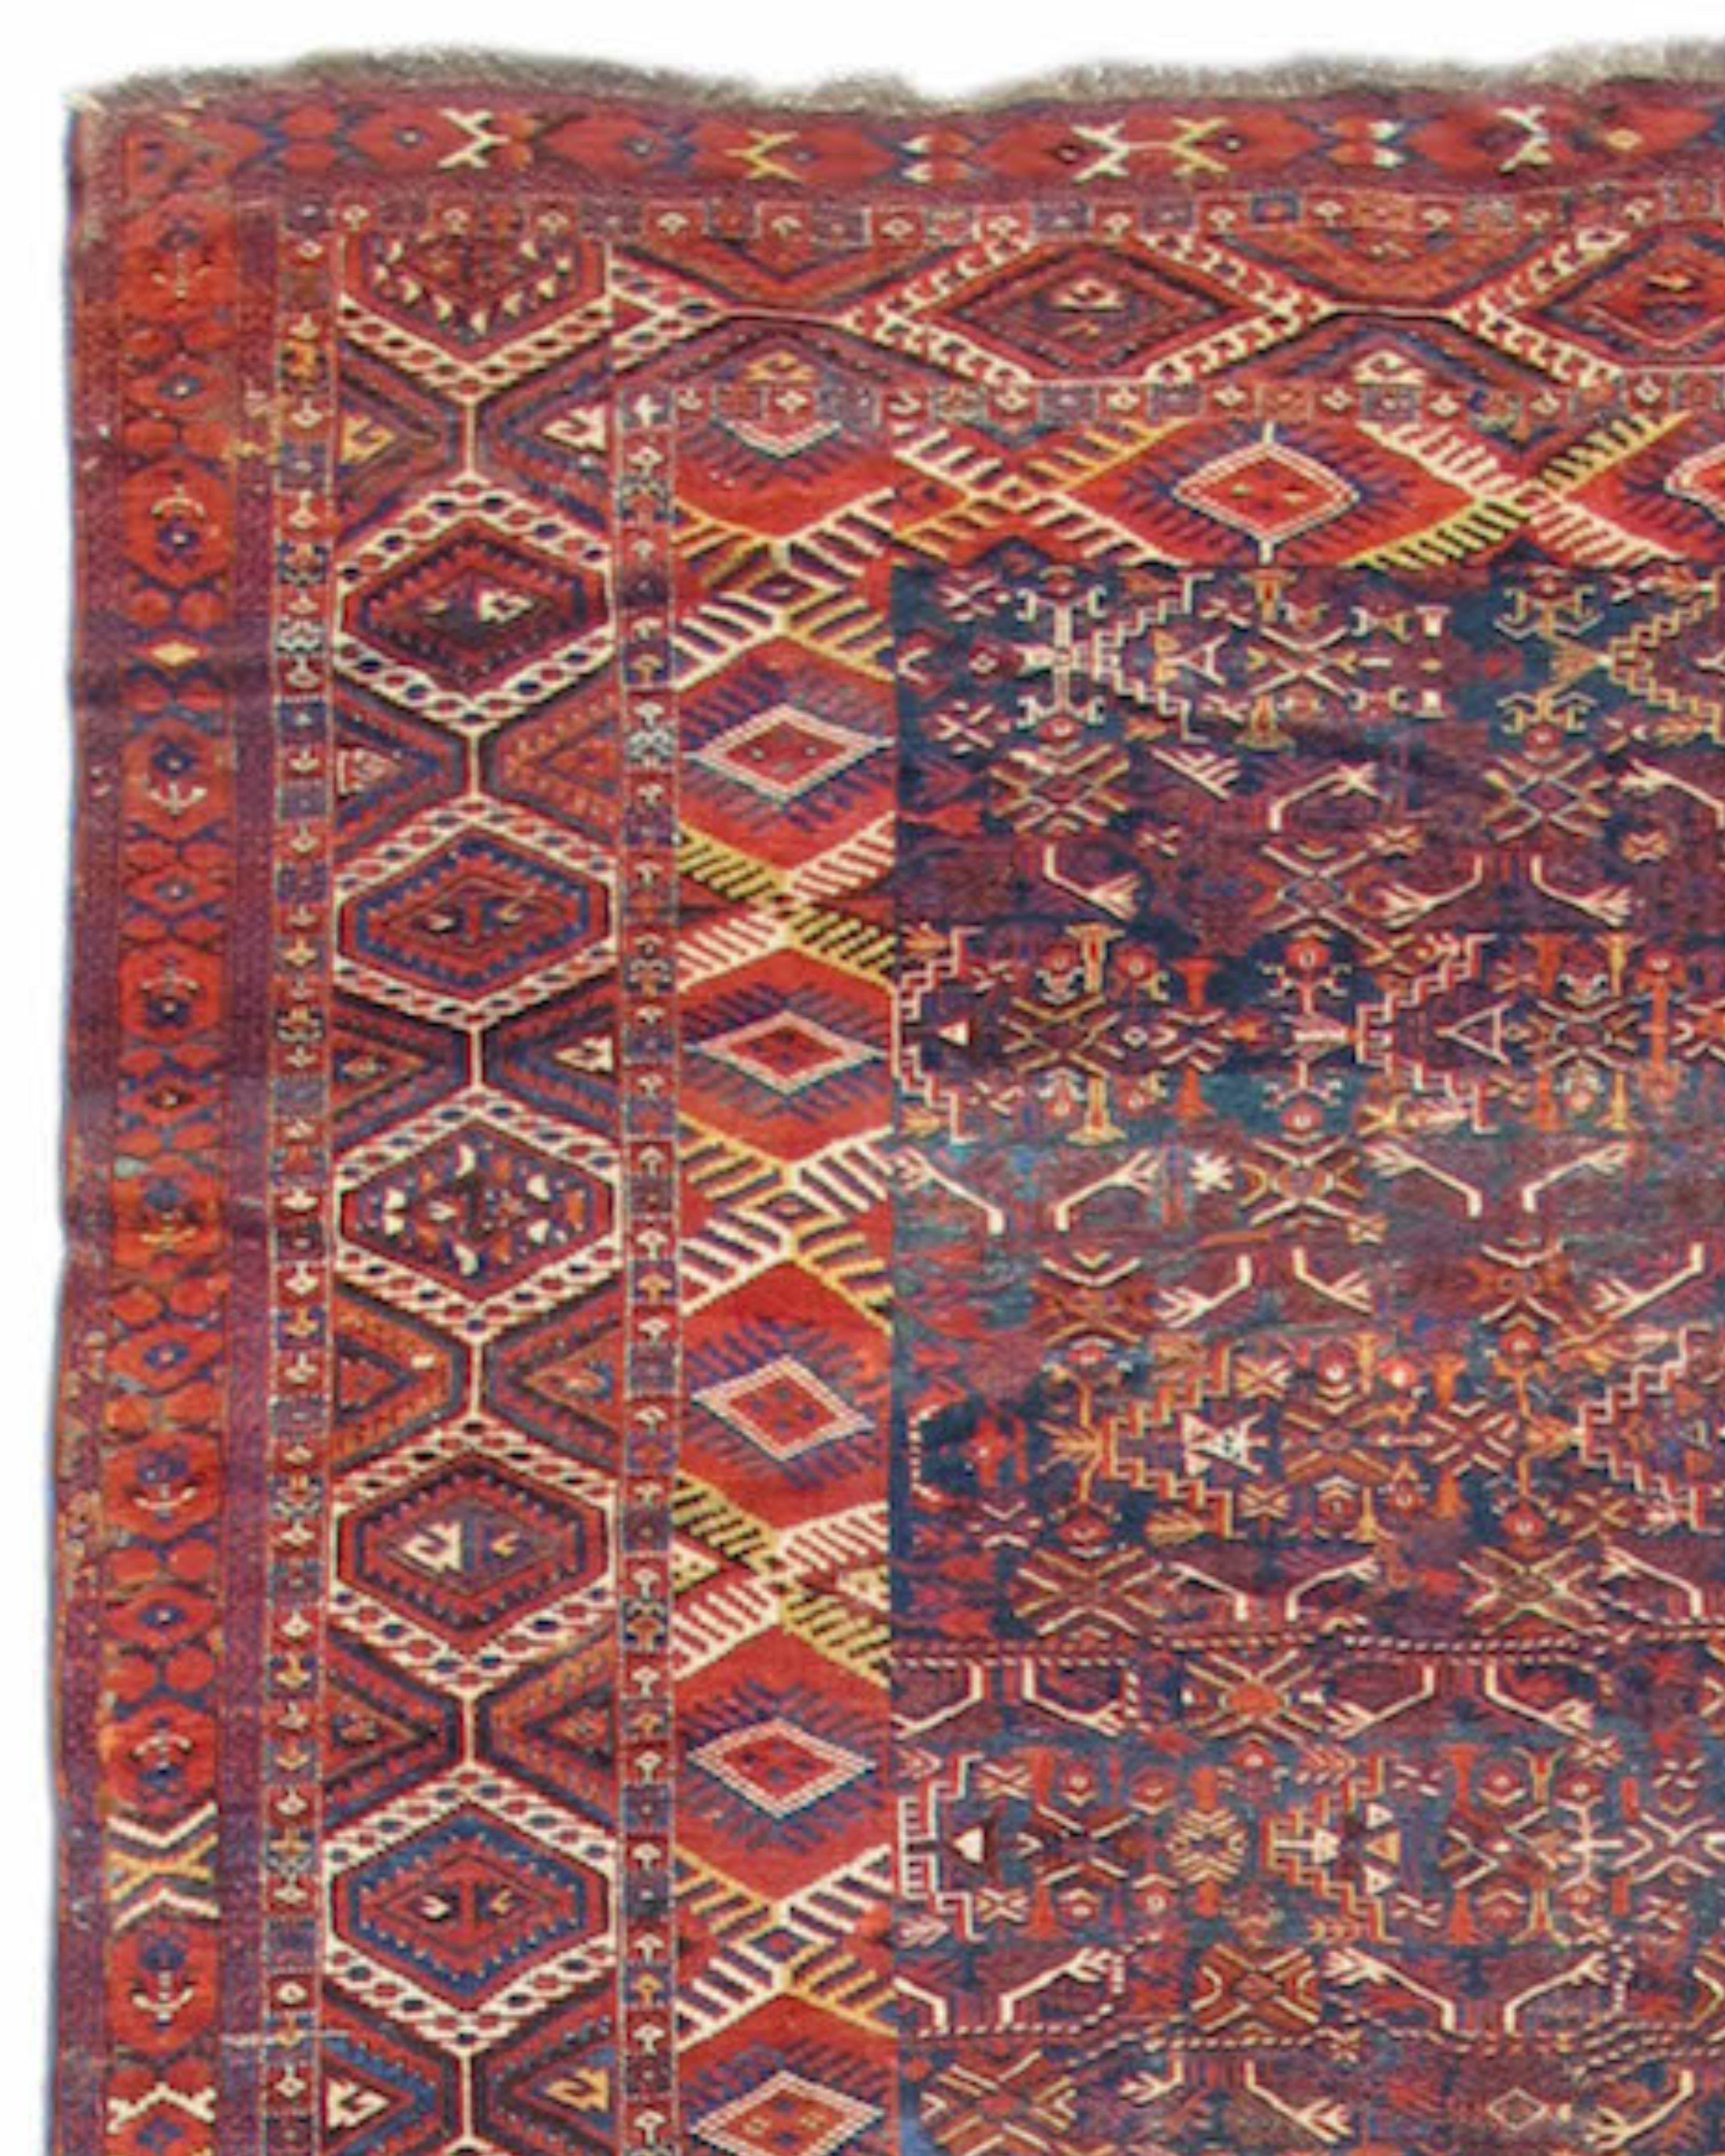 Antique Bashir Rug, Mid-19th Century In Good Condition For Sale In San Francisco, CA